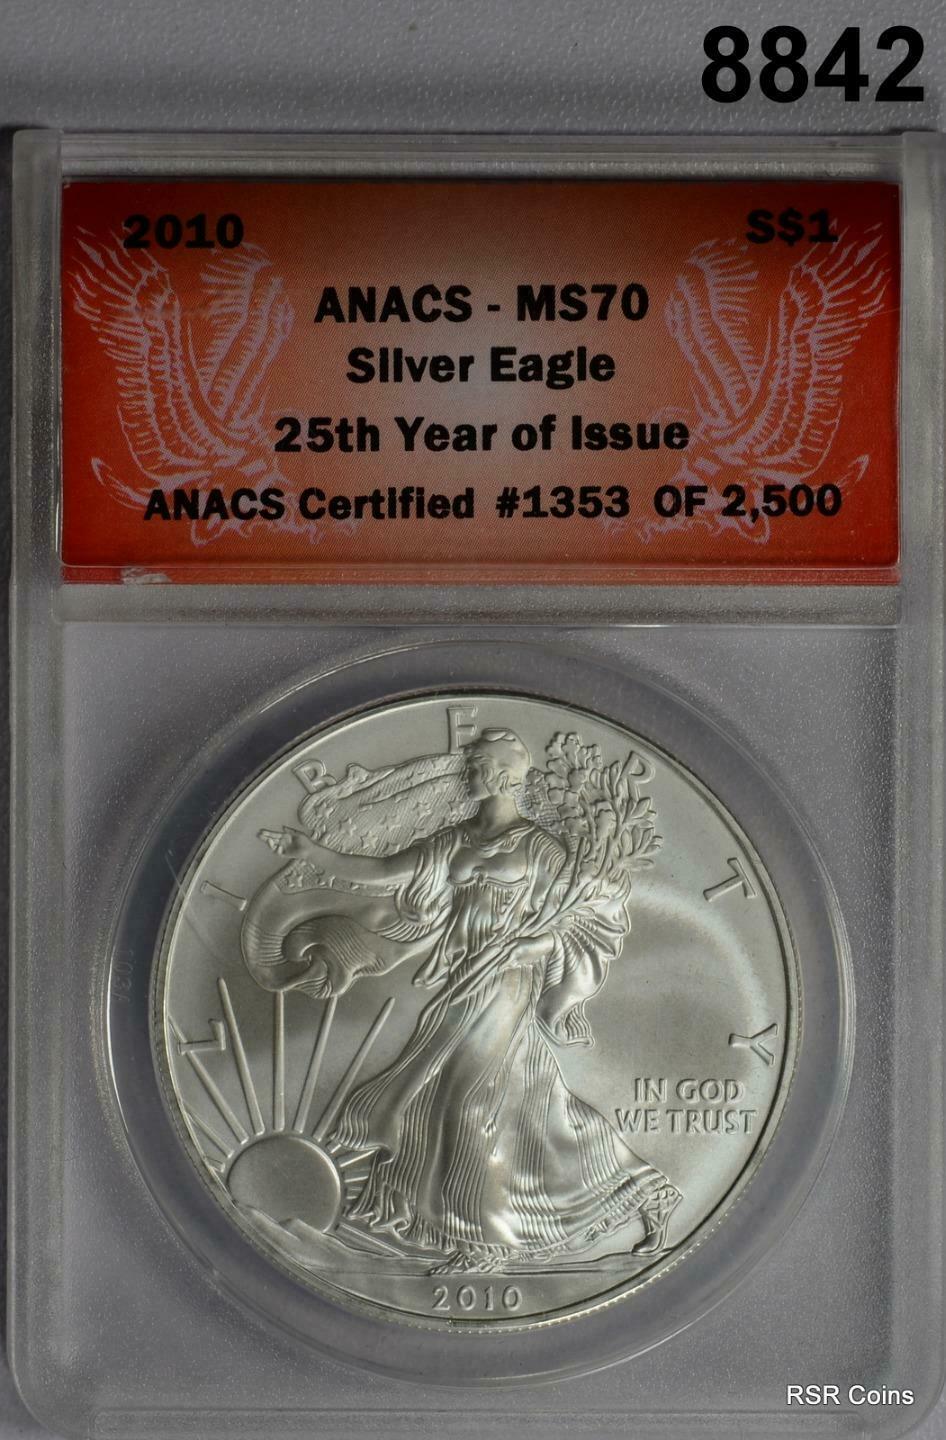 2010 & 2011 ANACS CERTIFIED SILVER EAGLE 2 COIN SET #8842